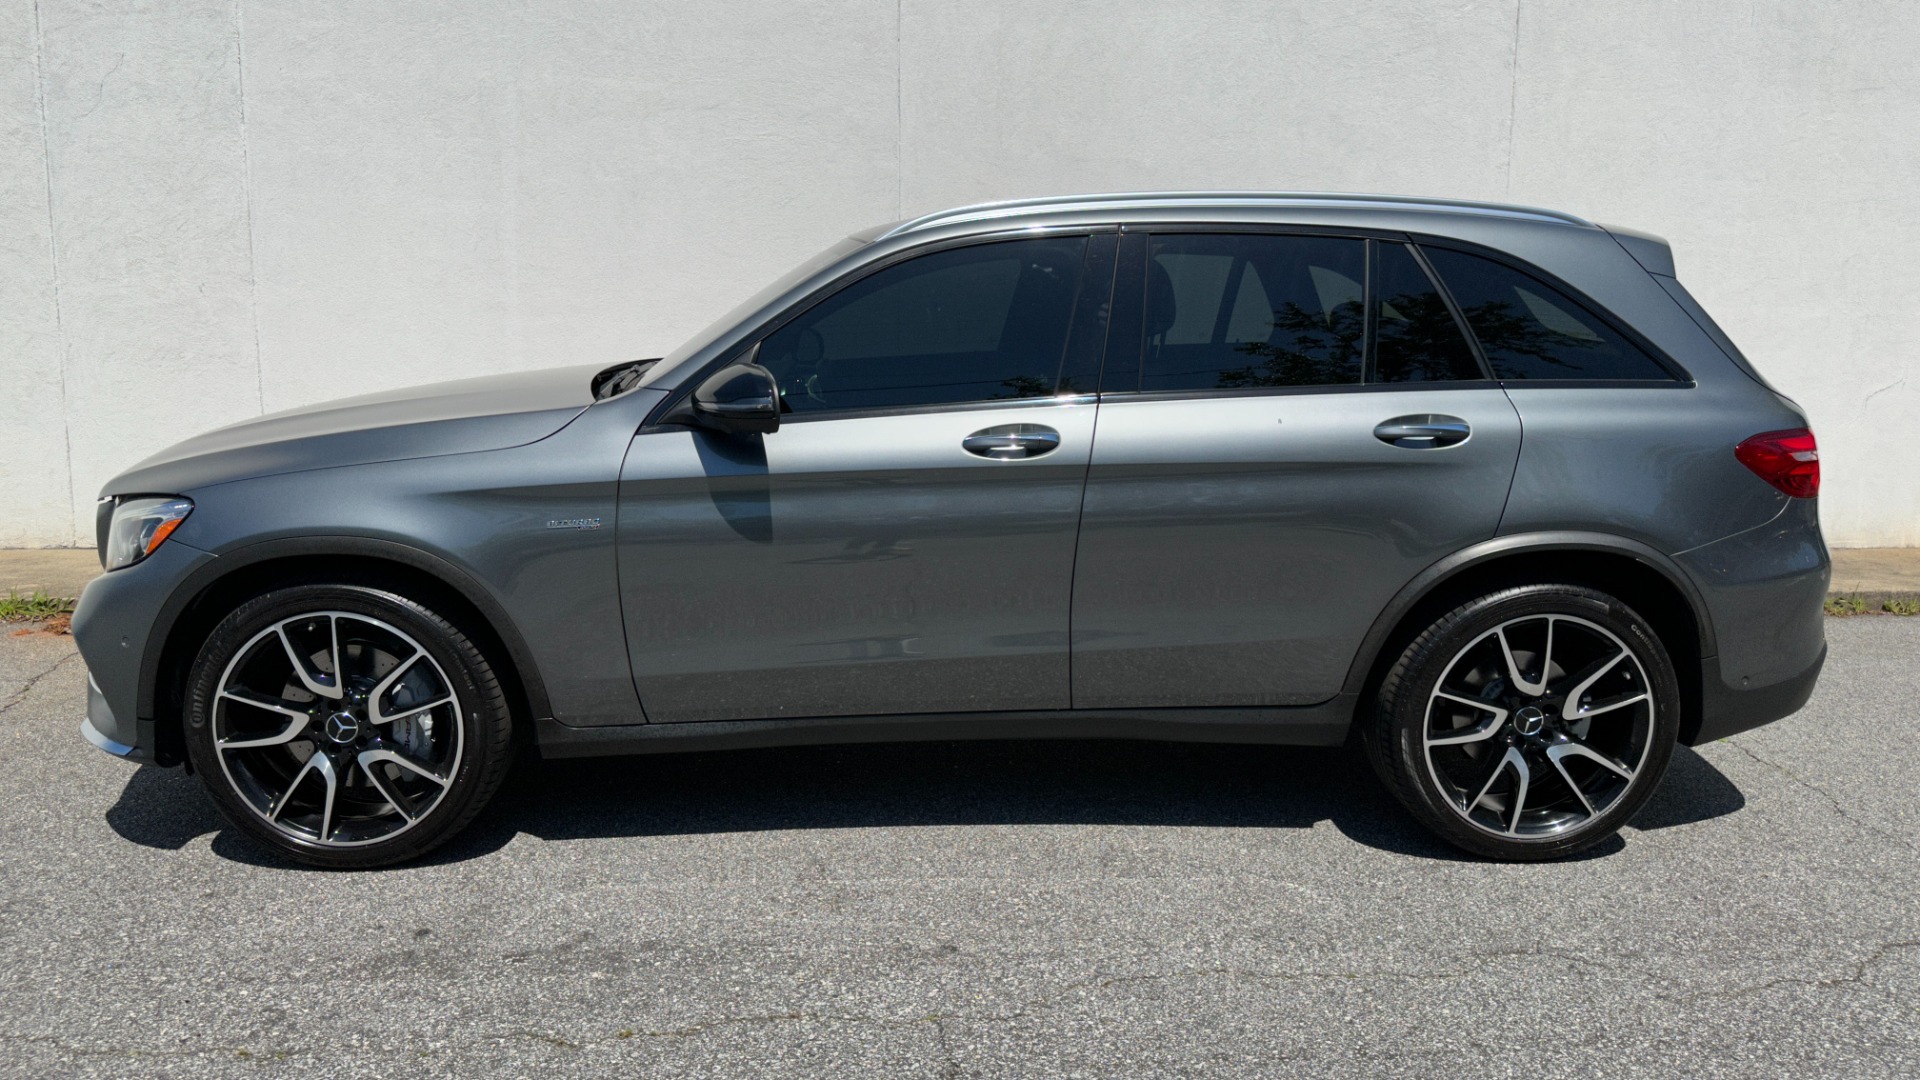 Used 2019 Mercedes-Benz GLC AMG GLC 43 / DRIVER ASSIST / CARBON FIBER / AMG 21IN WHEELS / BURMESTER for sale $41,995 at Formula Imports in Charlotte NC 28227 3